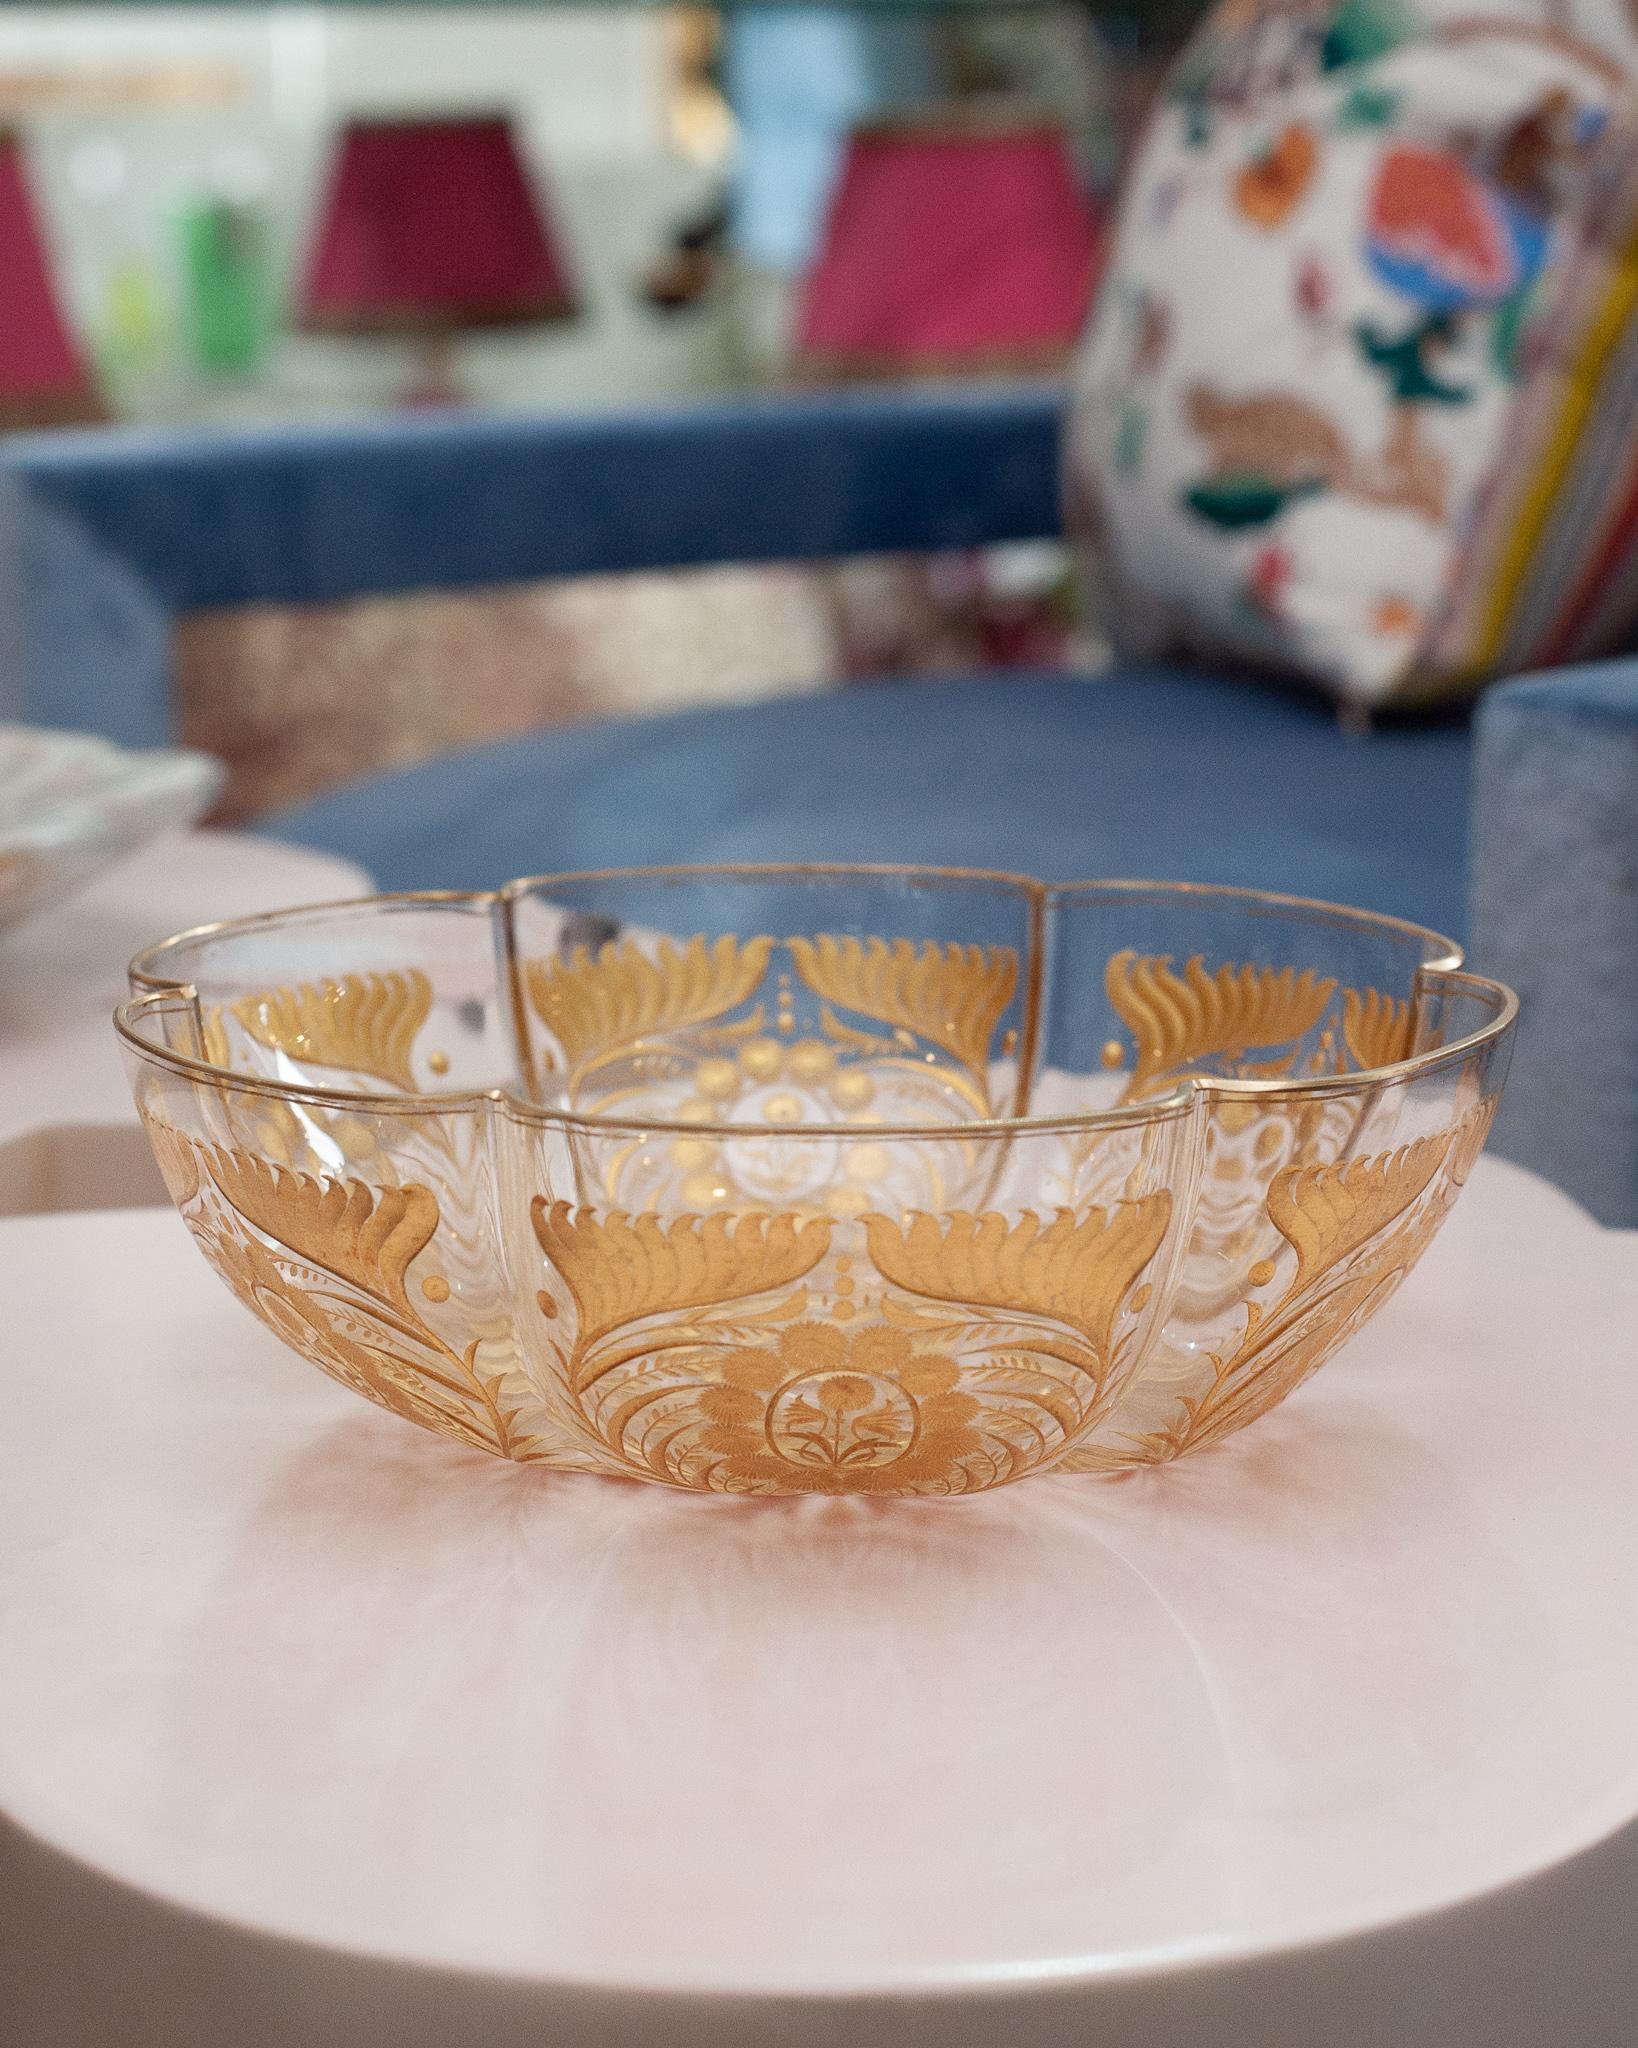 A stunning and ornately etched and gilded antique Moser scalloped crystal bowl. A fine example of top quality craftsmanship from the turn of the century. Perfect for decorative or serving use.